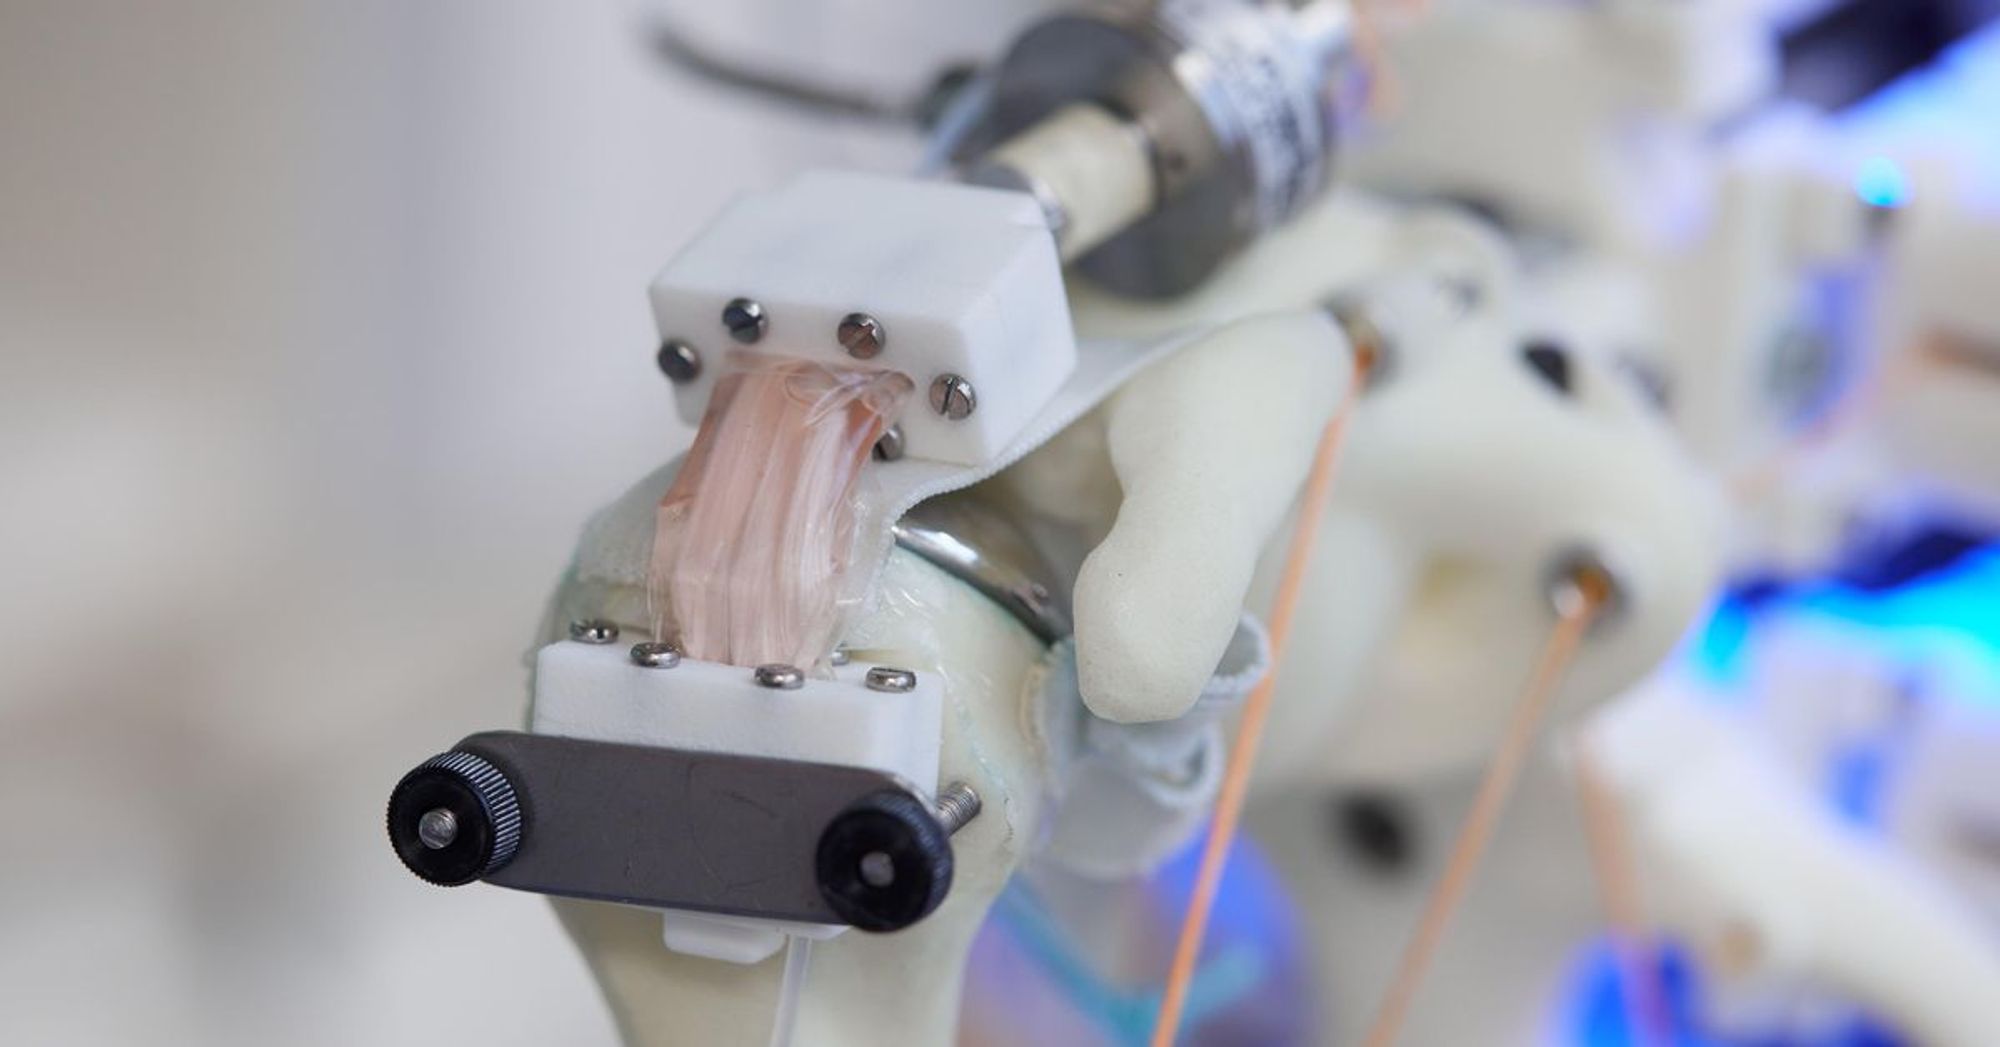 Scientists grow cells on a robot skeleton (but don't know what to do with them yet)